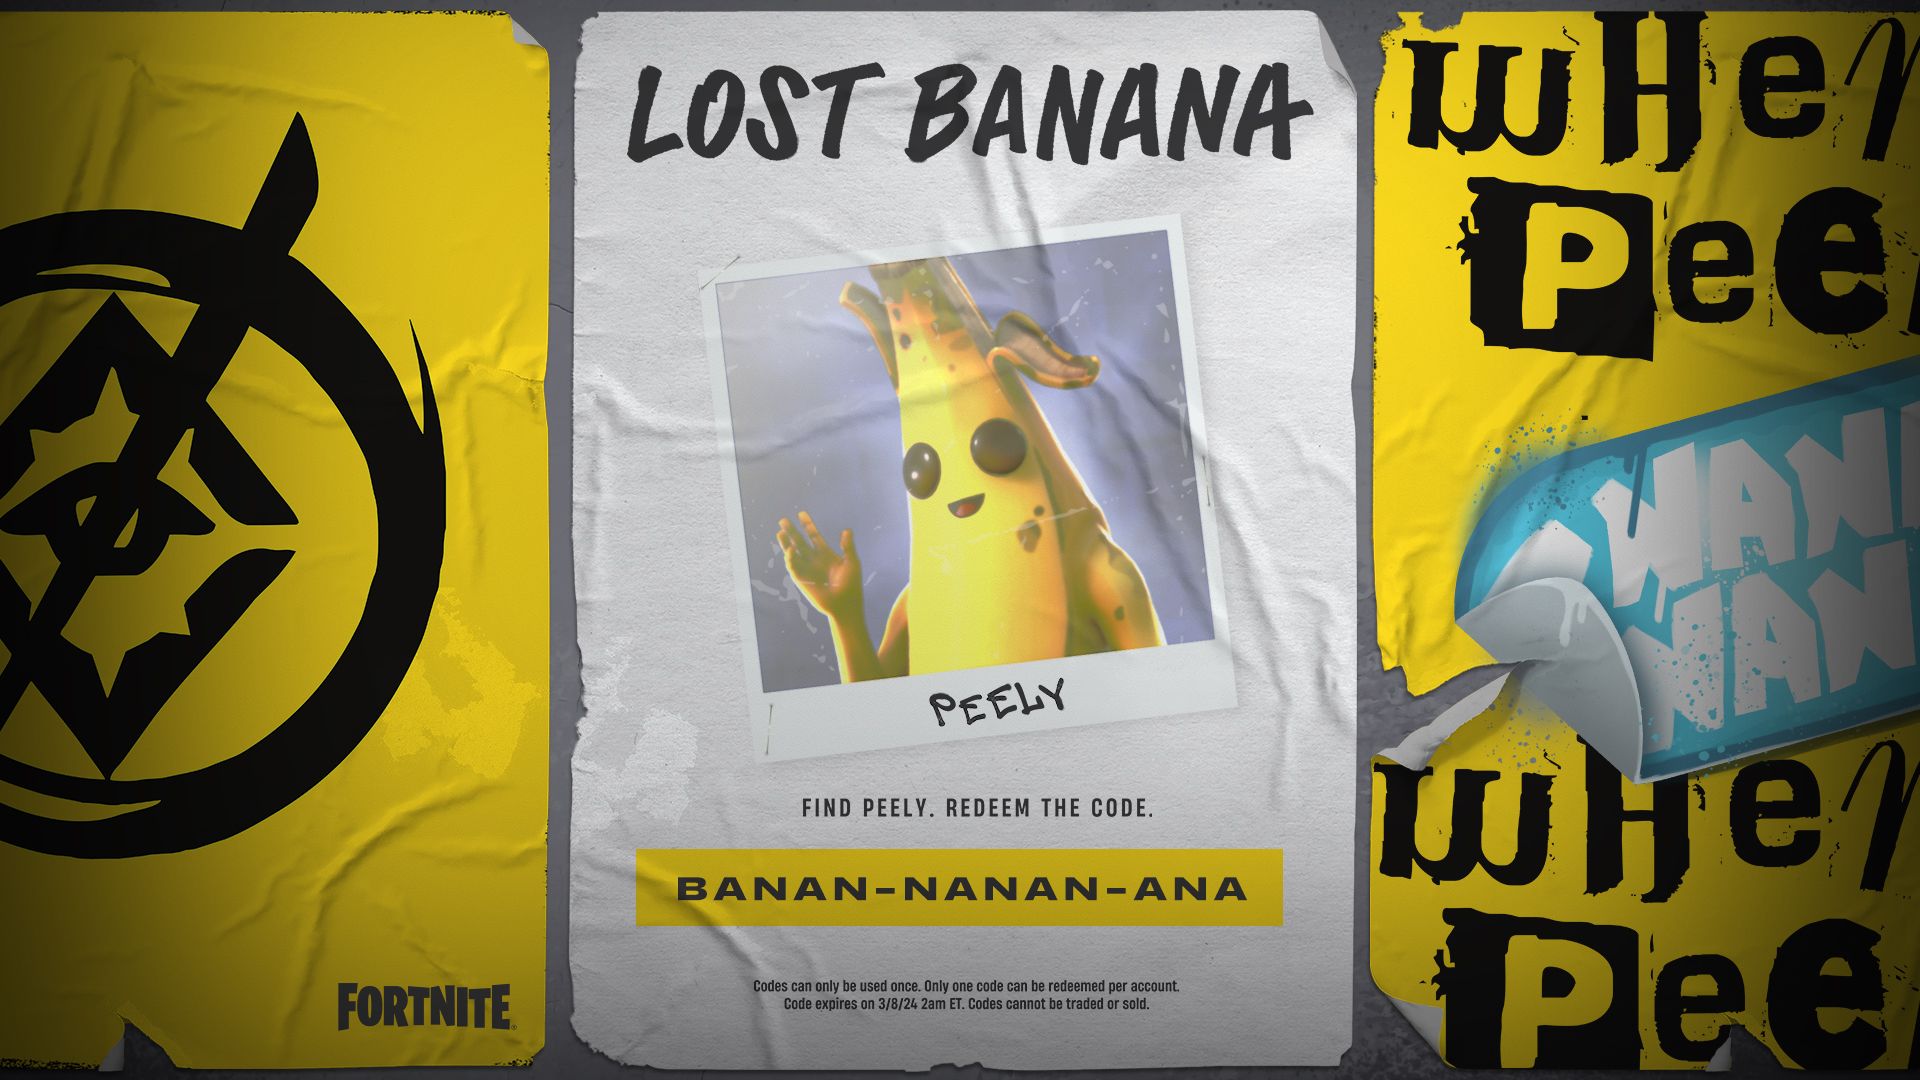 A lost banana missing poster with a redemption code on it, featuring Peely from Fortnite.